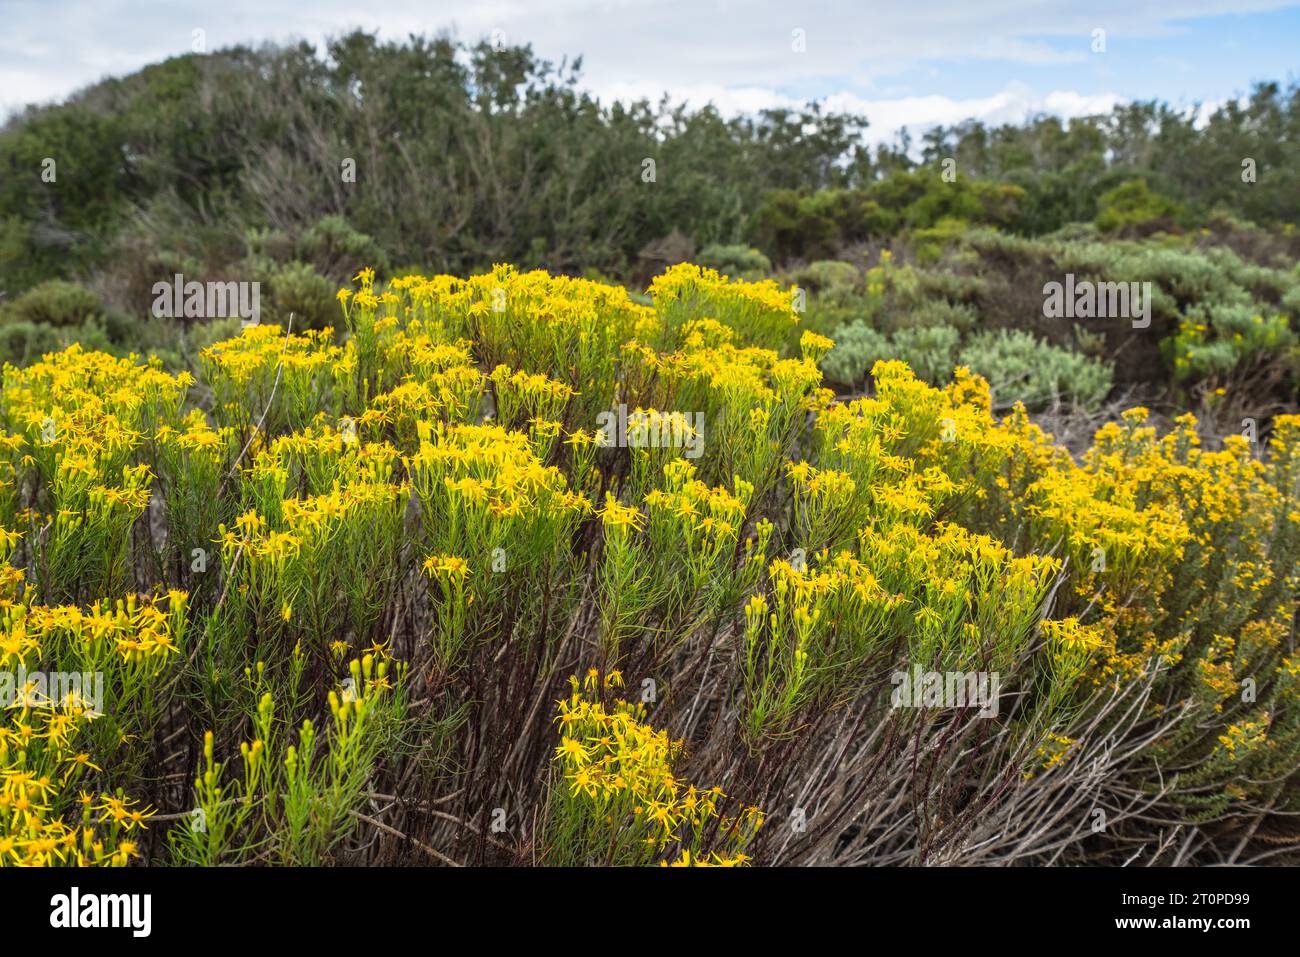 California Goldenbush (Ericameria ericoides) is a flowering shrub in daisy family. It grows in the sand dunes and coastal hills, California Central Co Stock Photo